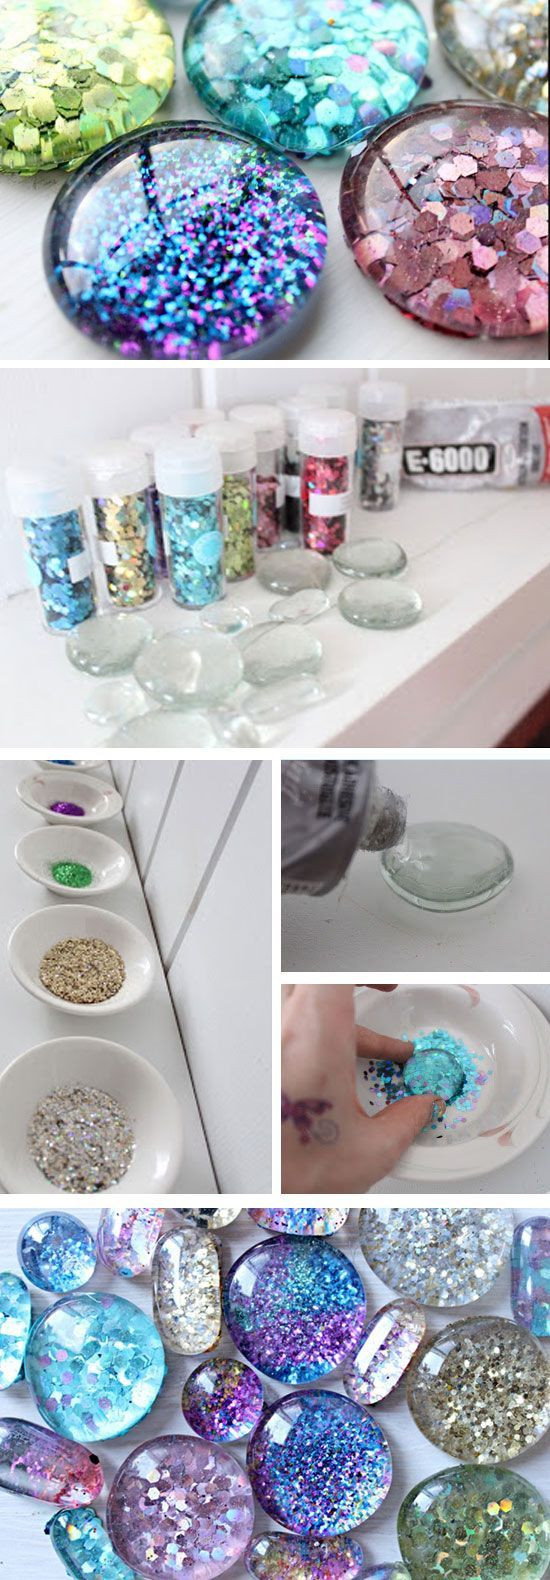 DIY Christmas Gifts For Teens
 Best 25 Teen crafts ideas on Pinterest